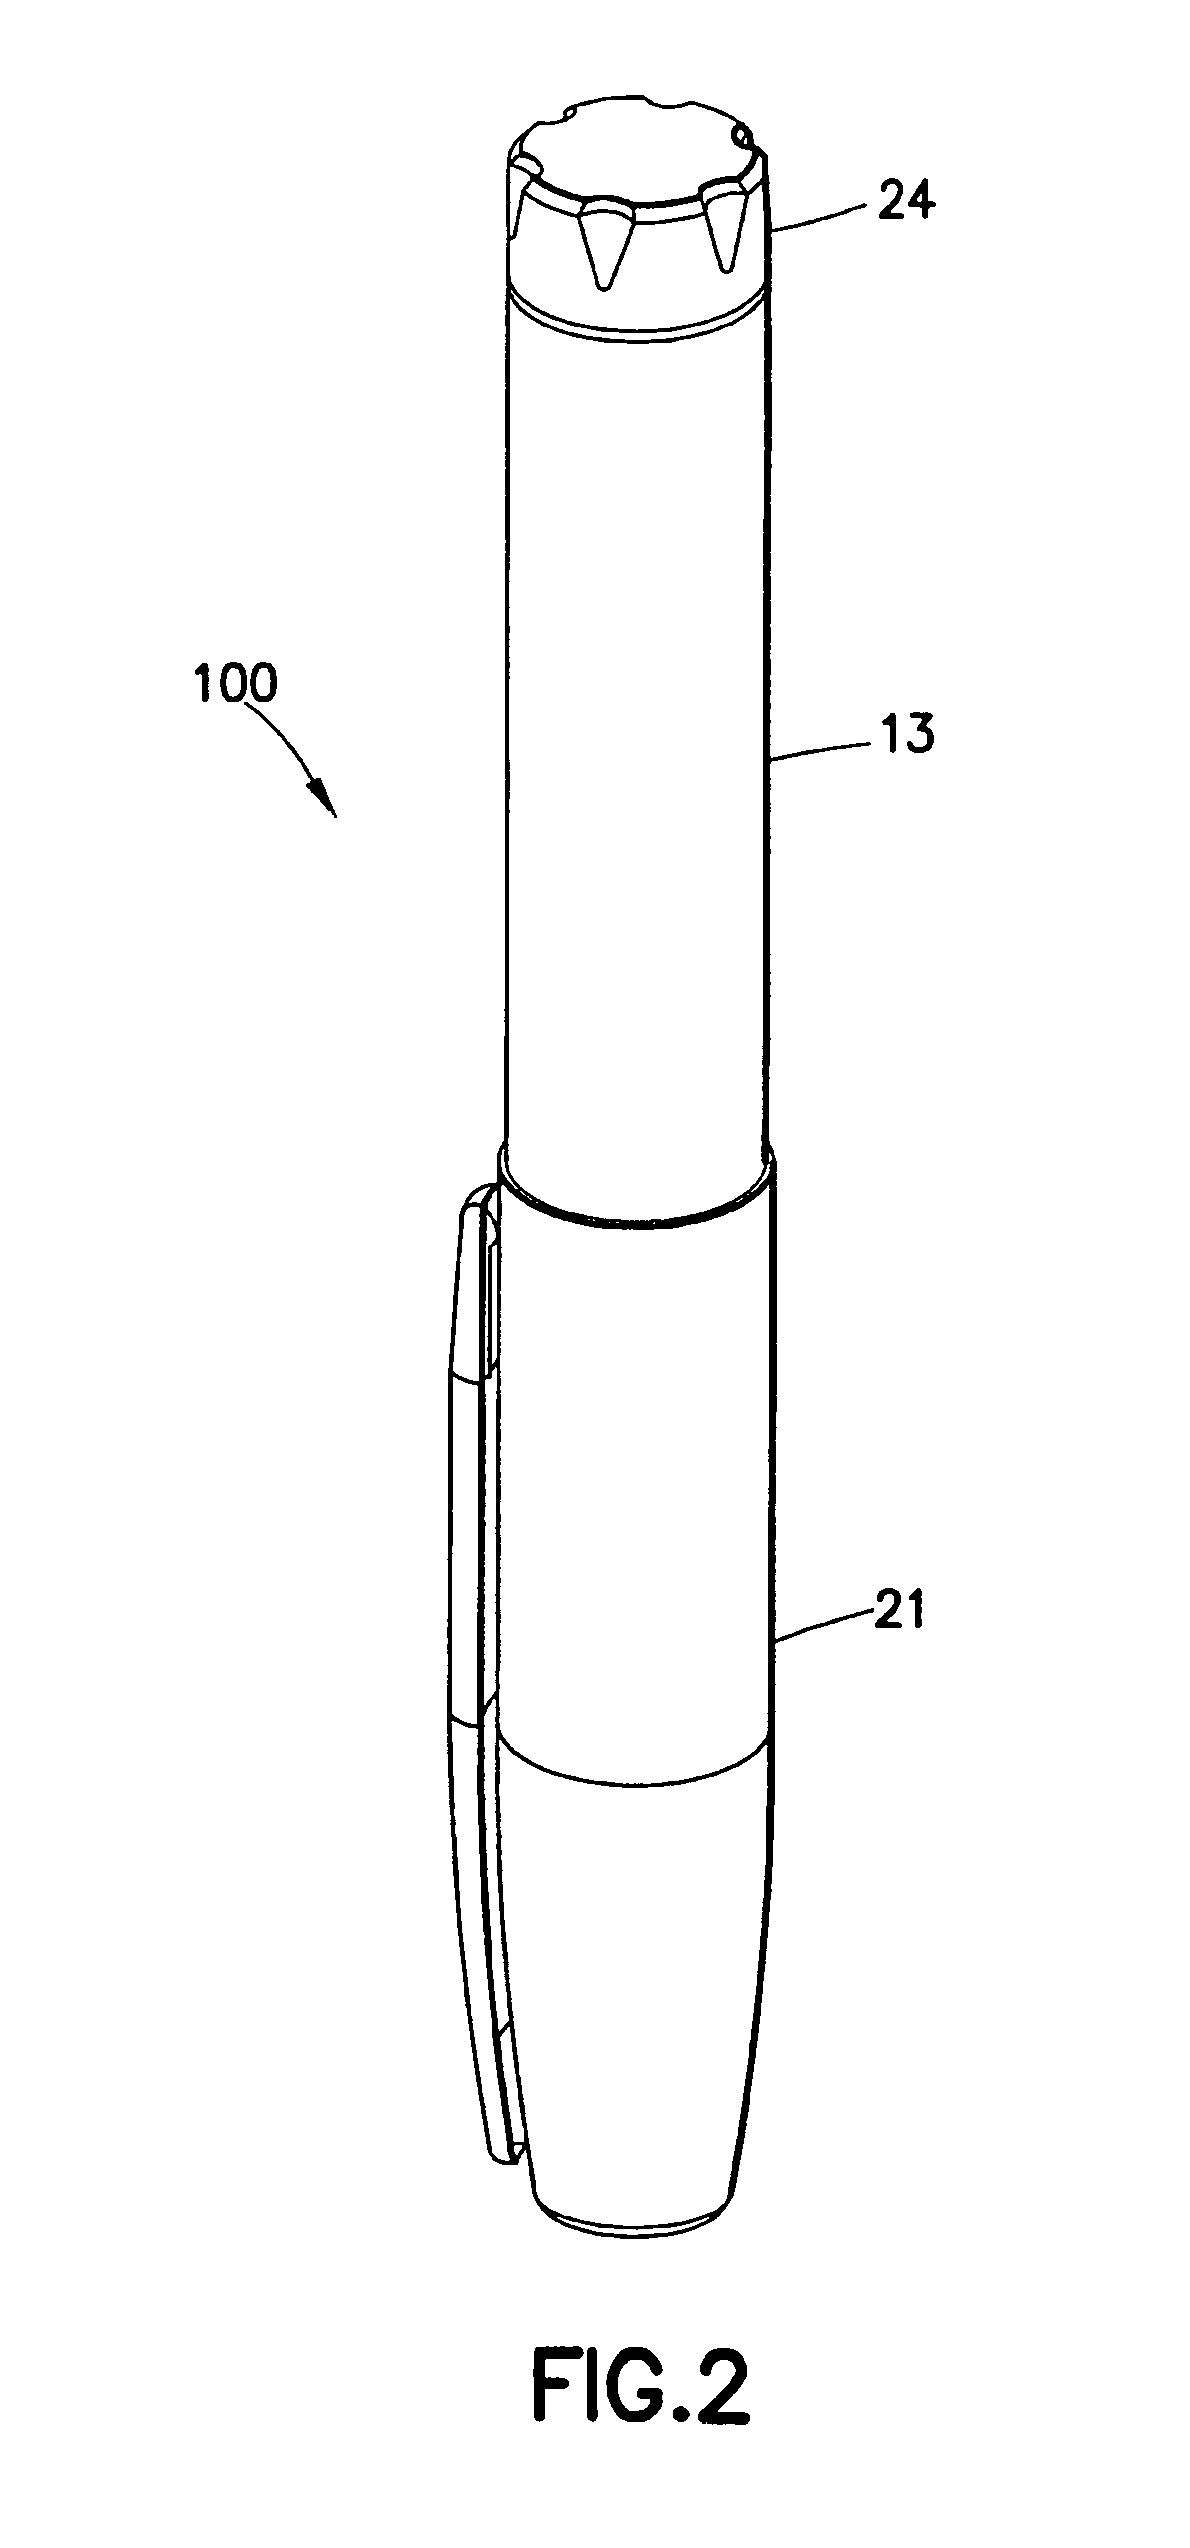 Lever and gear force multiplier medication delivery system for high pressure injection system